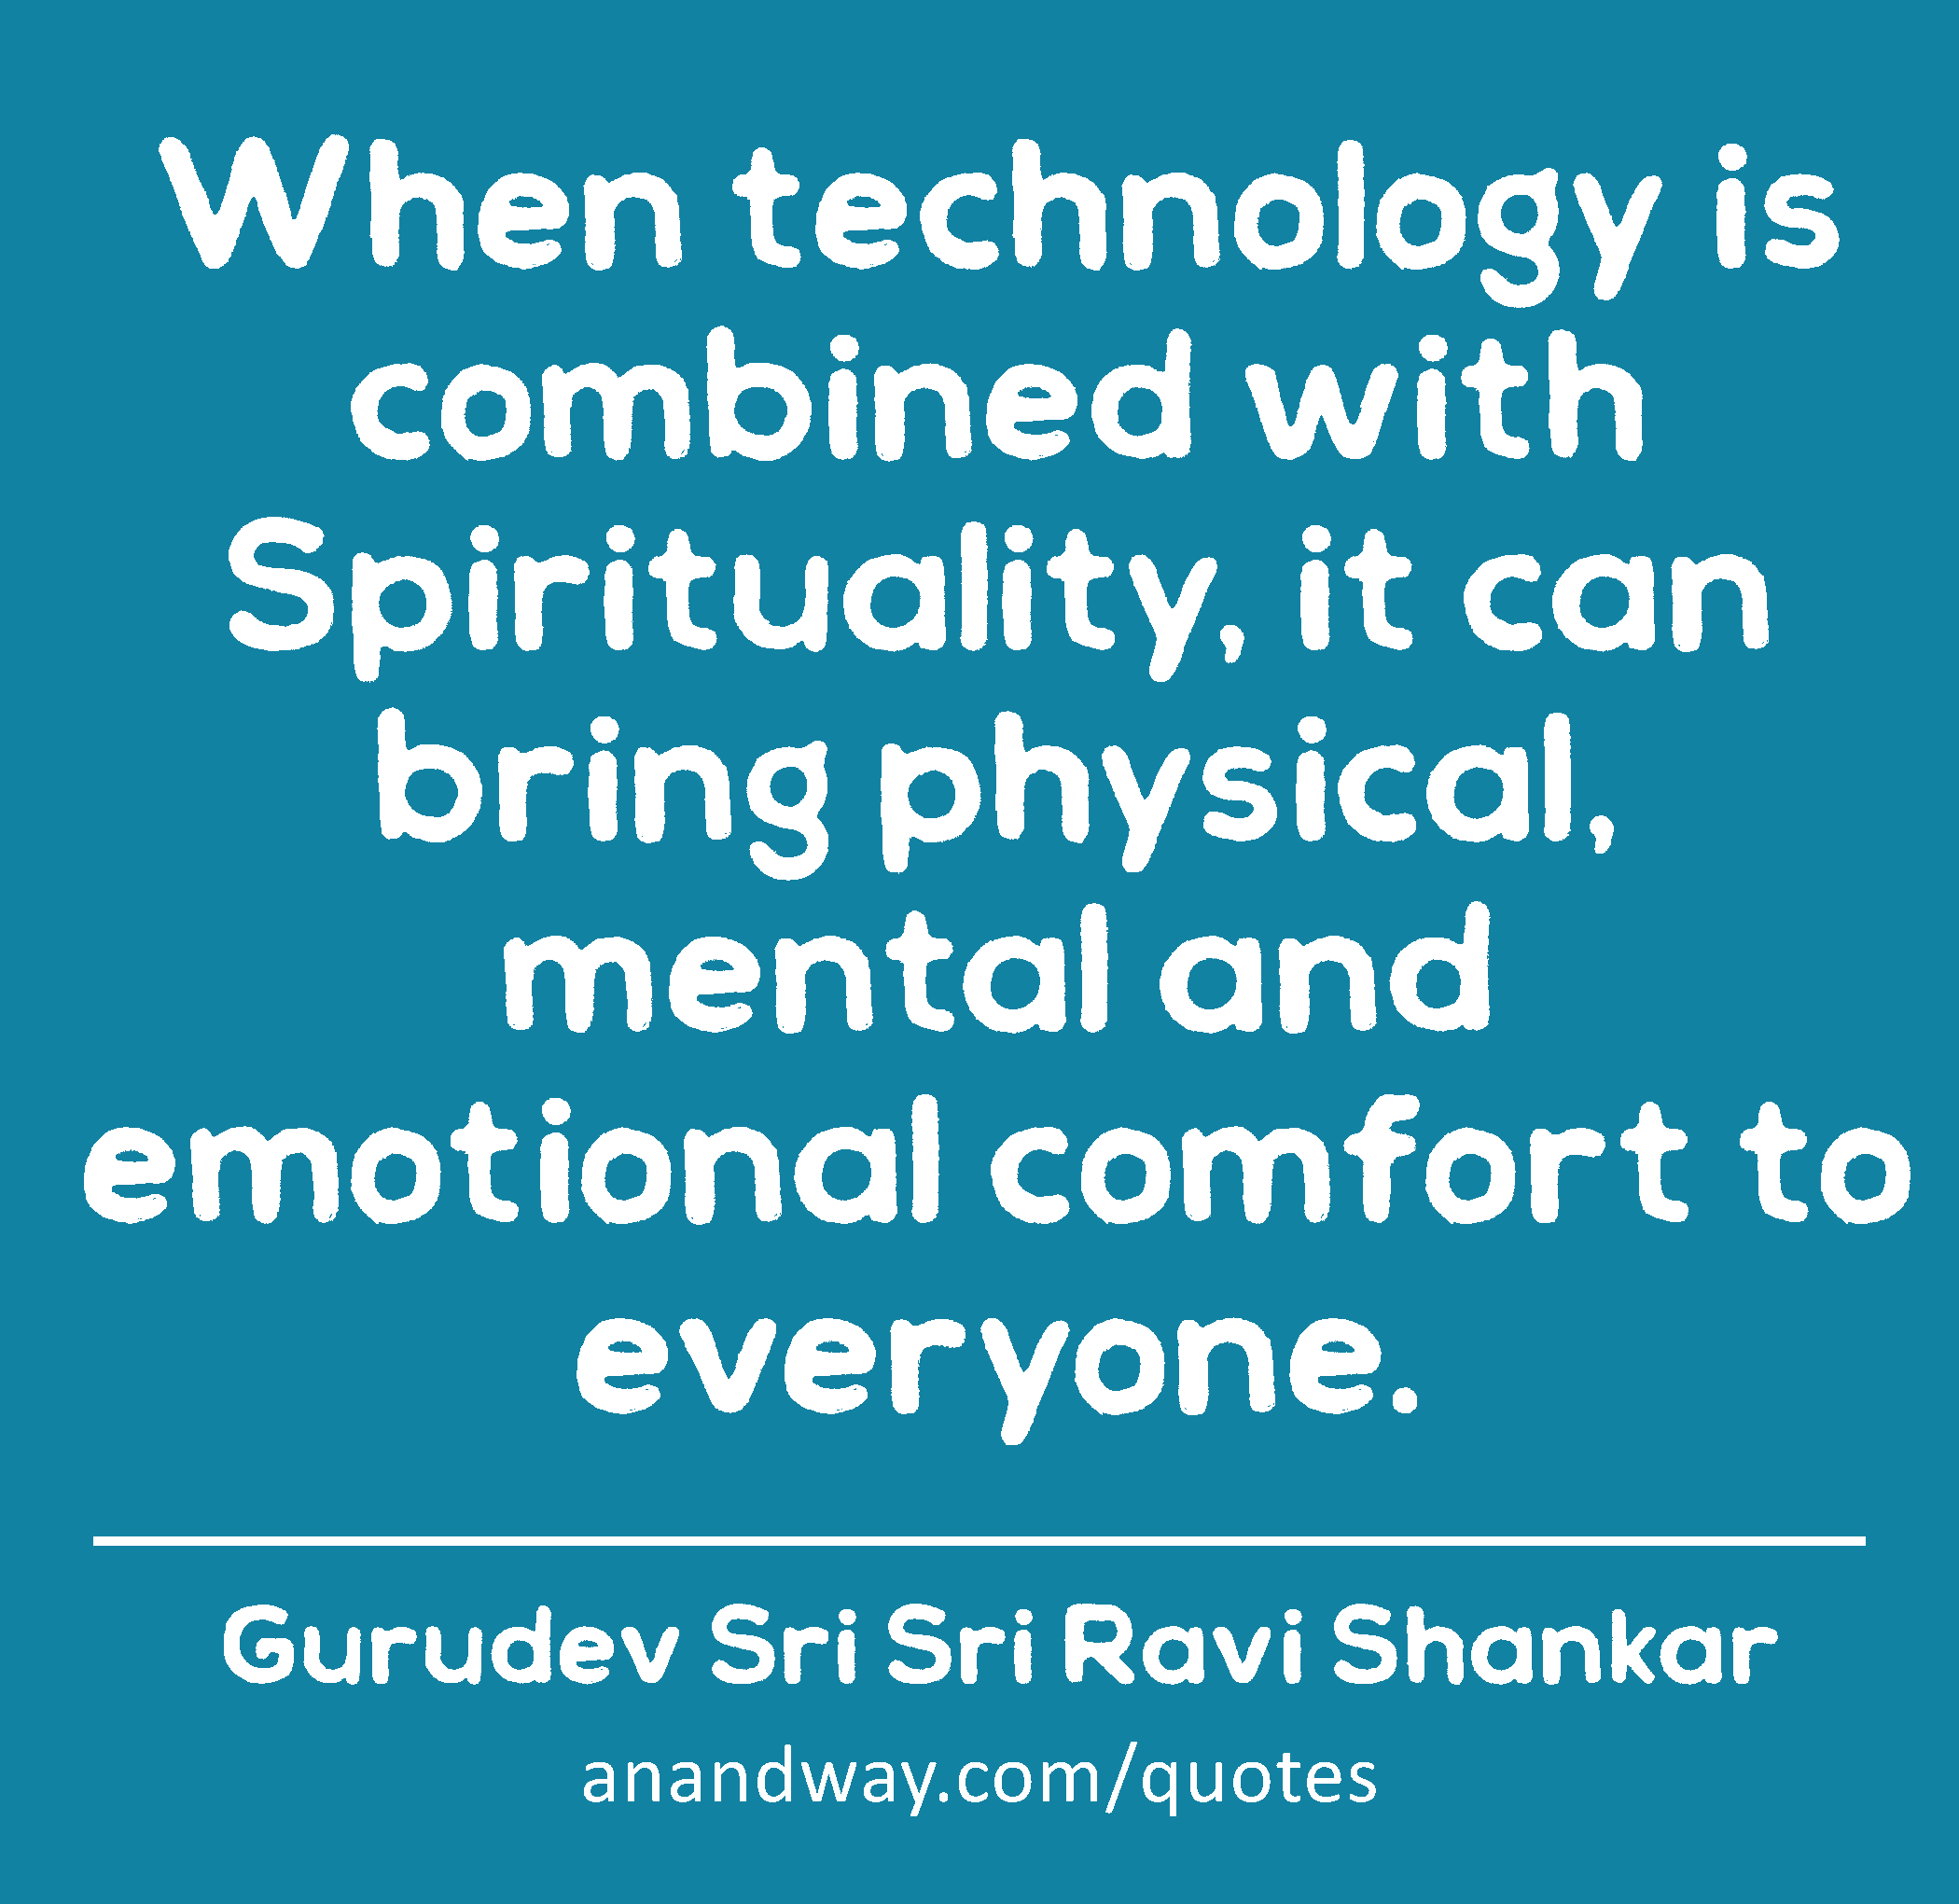 When technology is combined with Spirituality, it can bring physical, mental and emotional comfort
 -Gurudev Sri Sri Ravi Shankar